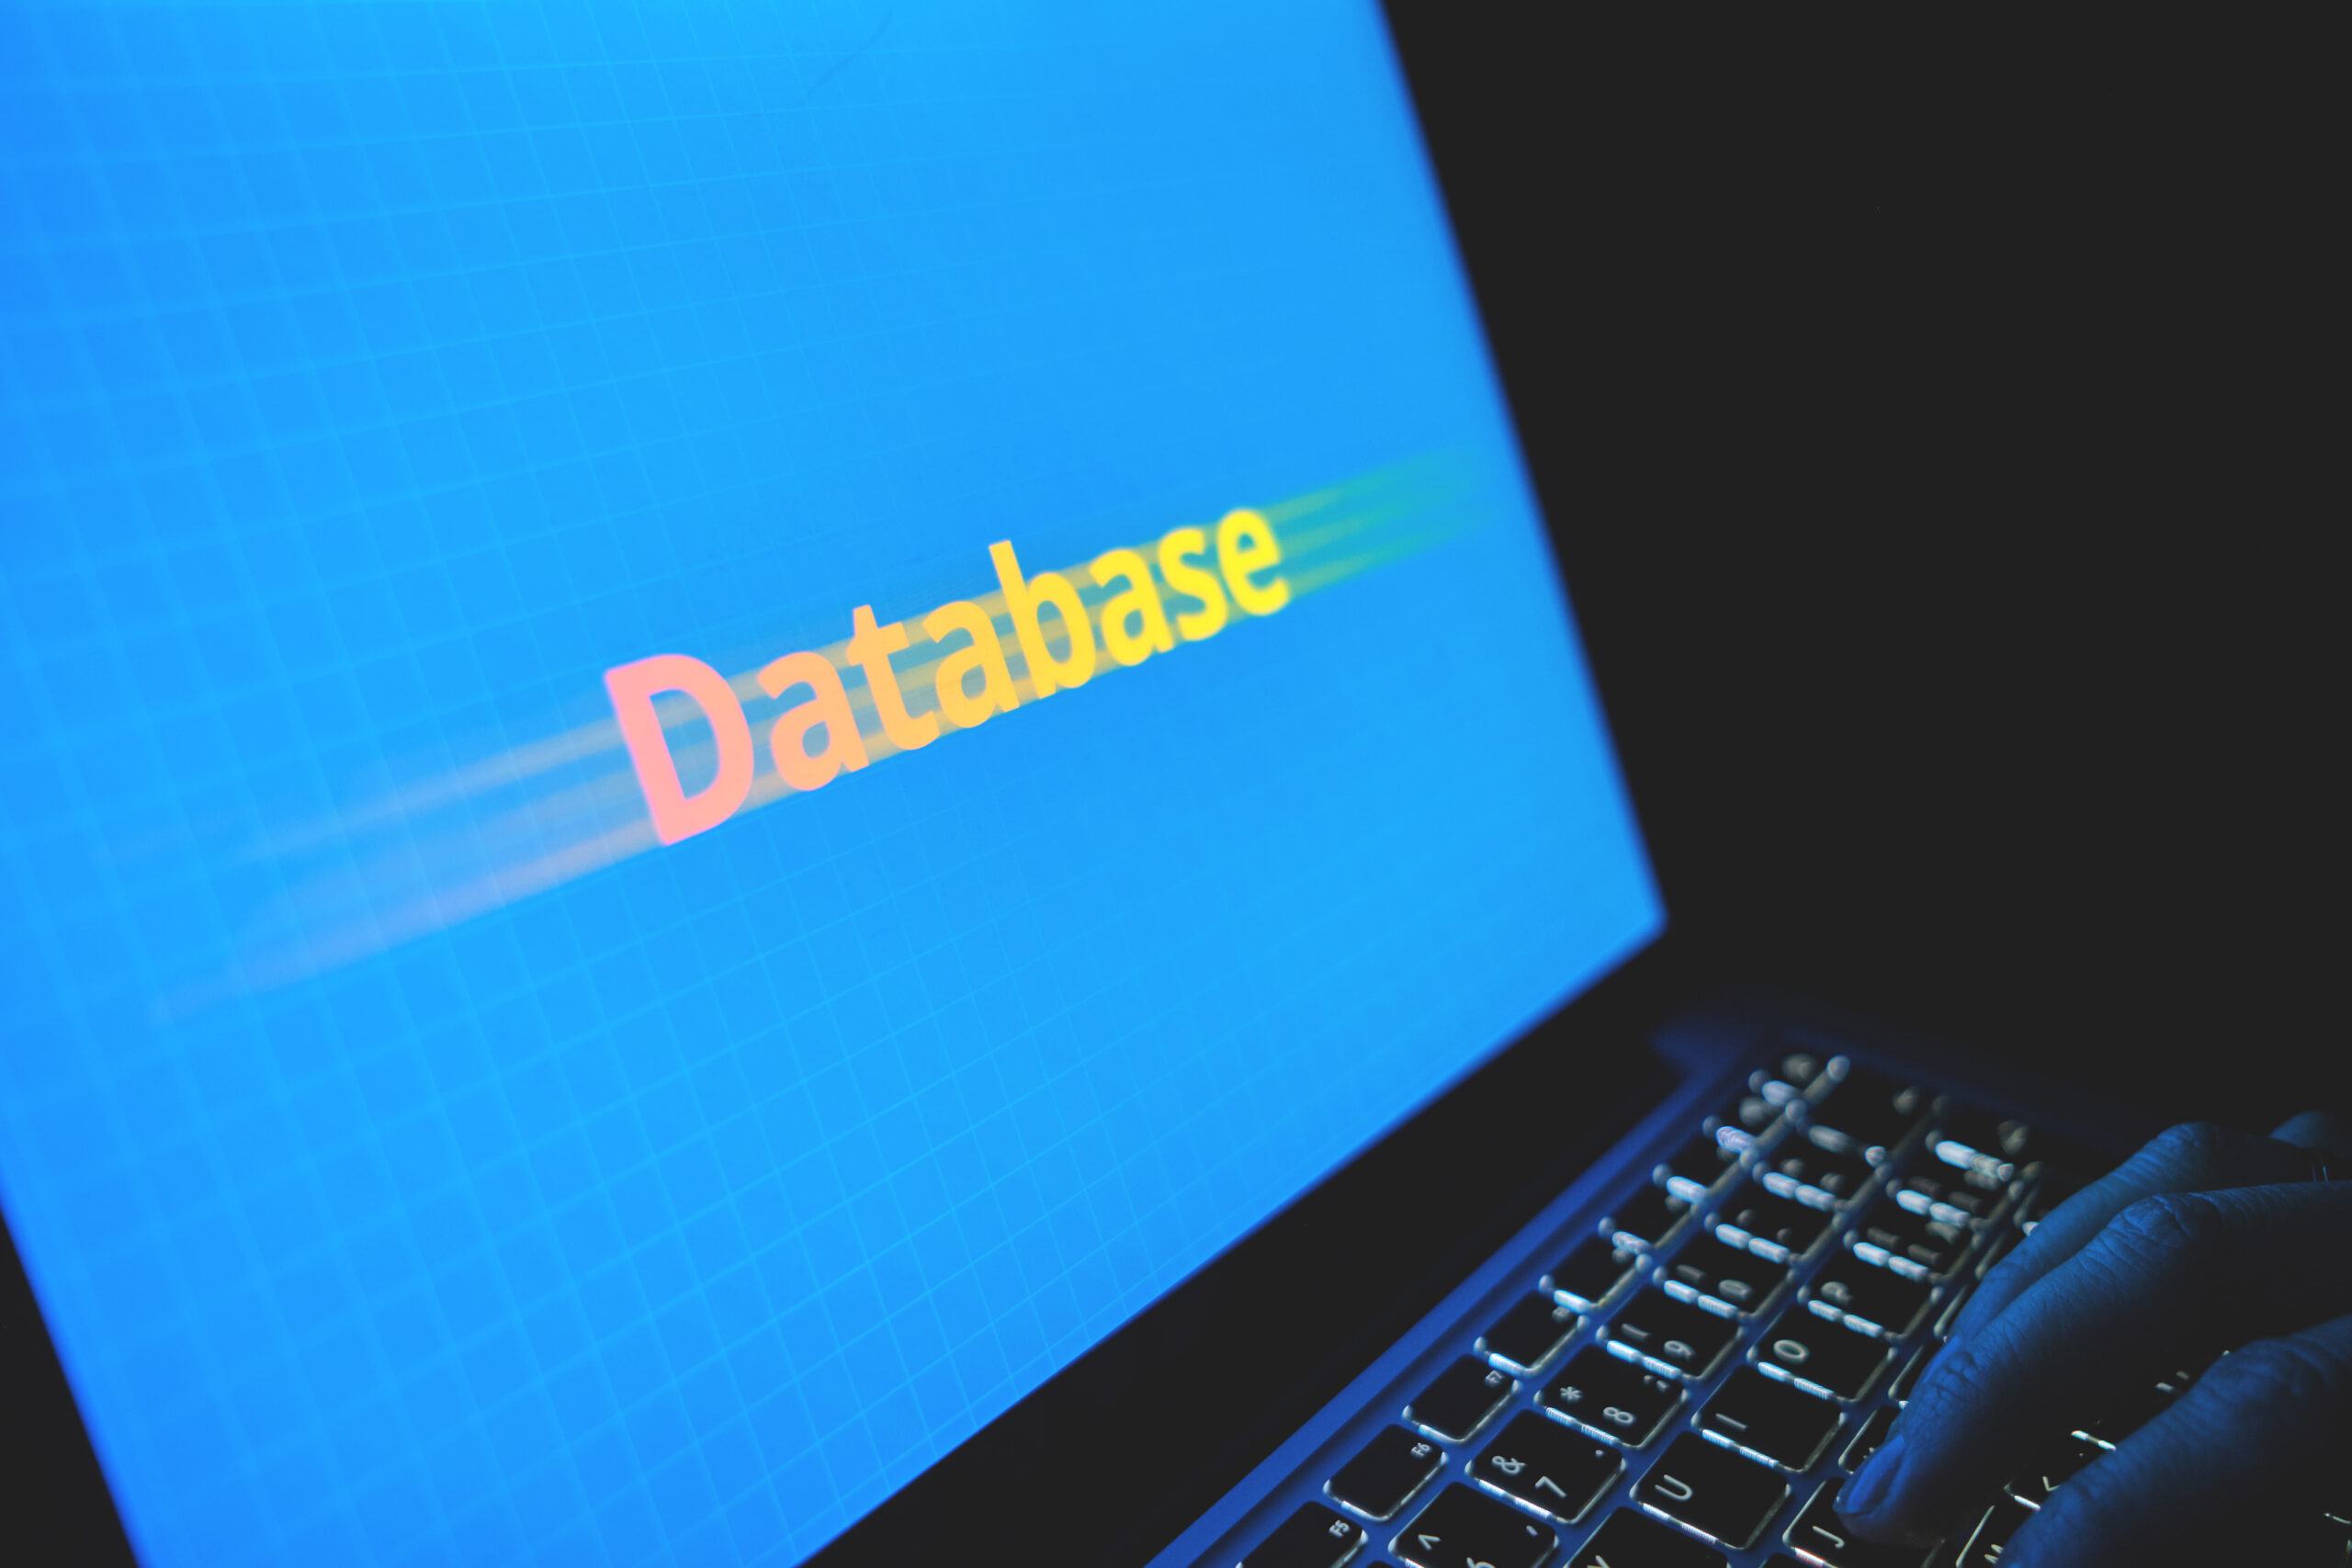 Computer screen showing the word "Database"